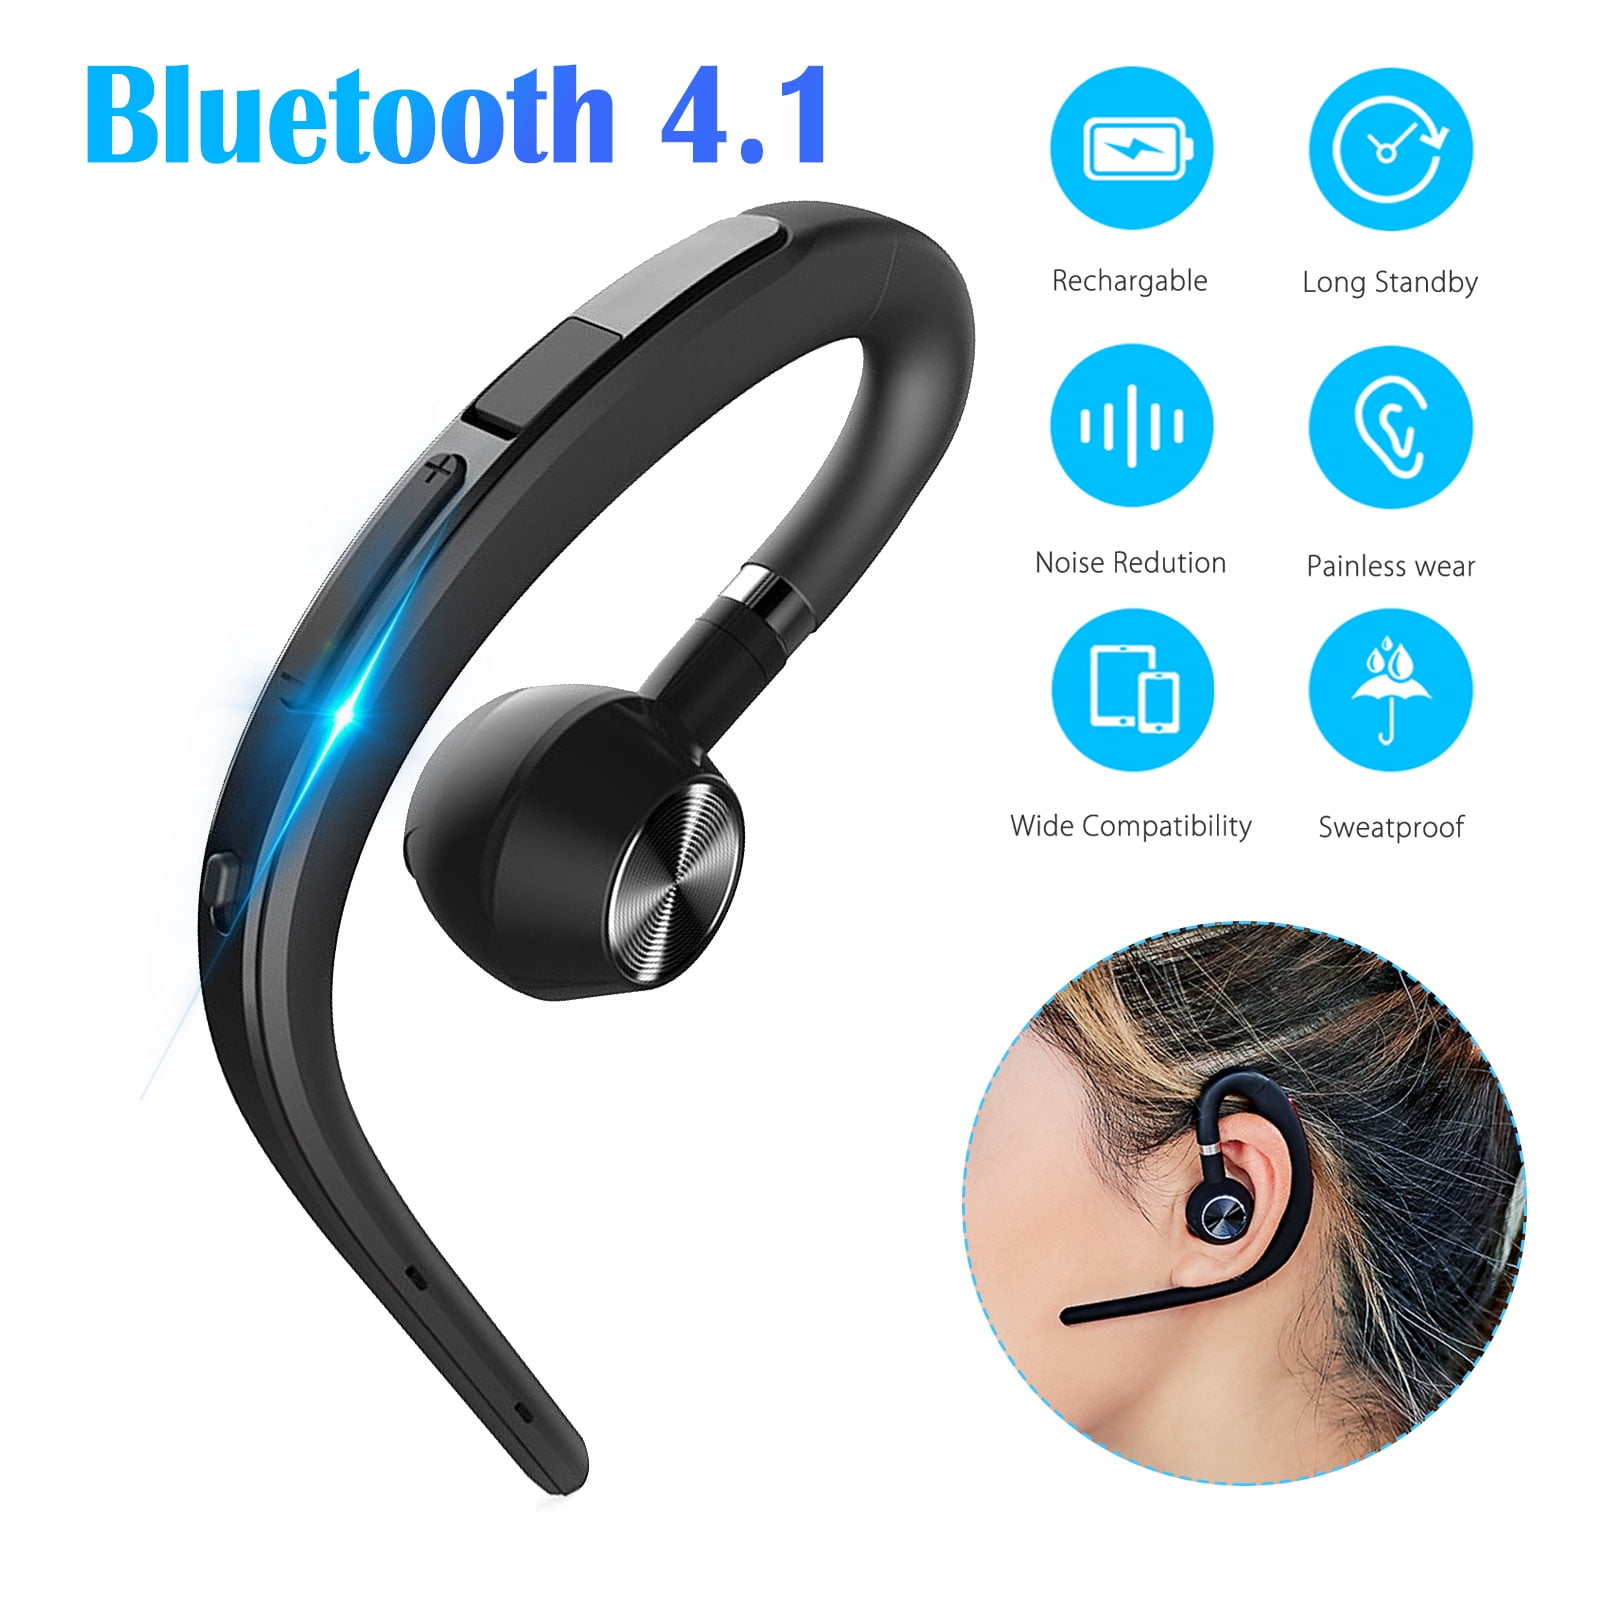 Bluetooth Headset, EEEKit Wireless Bluetooth 4.1 Earpiece Headphones Earphones Ear Hooks with Noise Cancelling Mic for Business/Office/Driving/Truck Support iPhone/Android Cell Phones